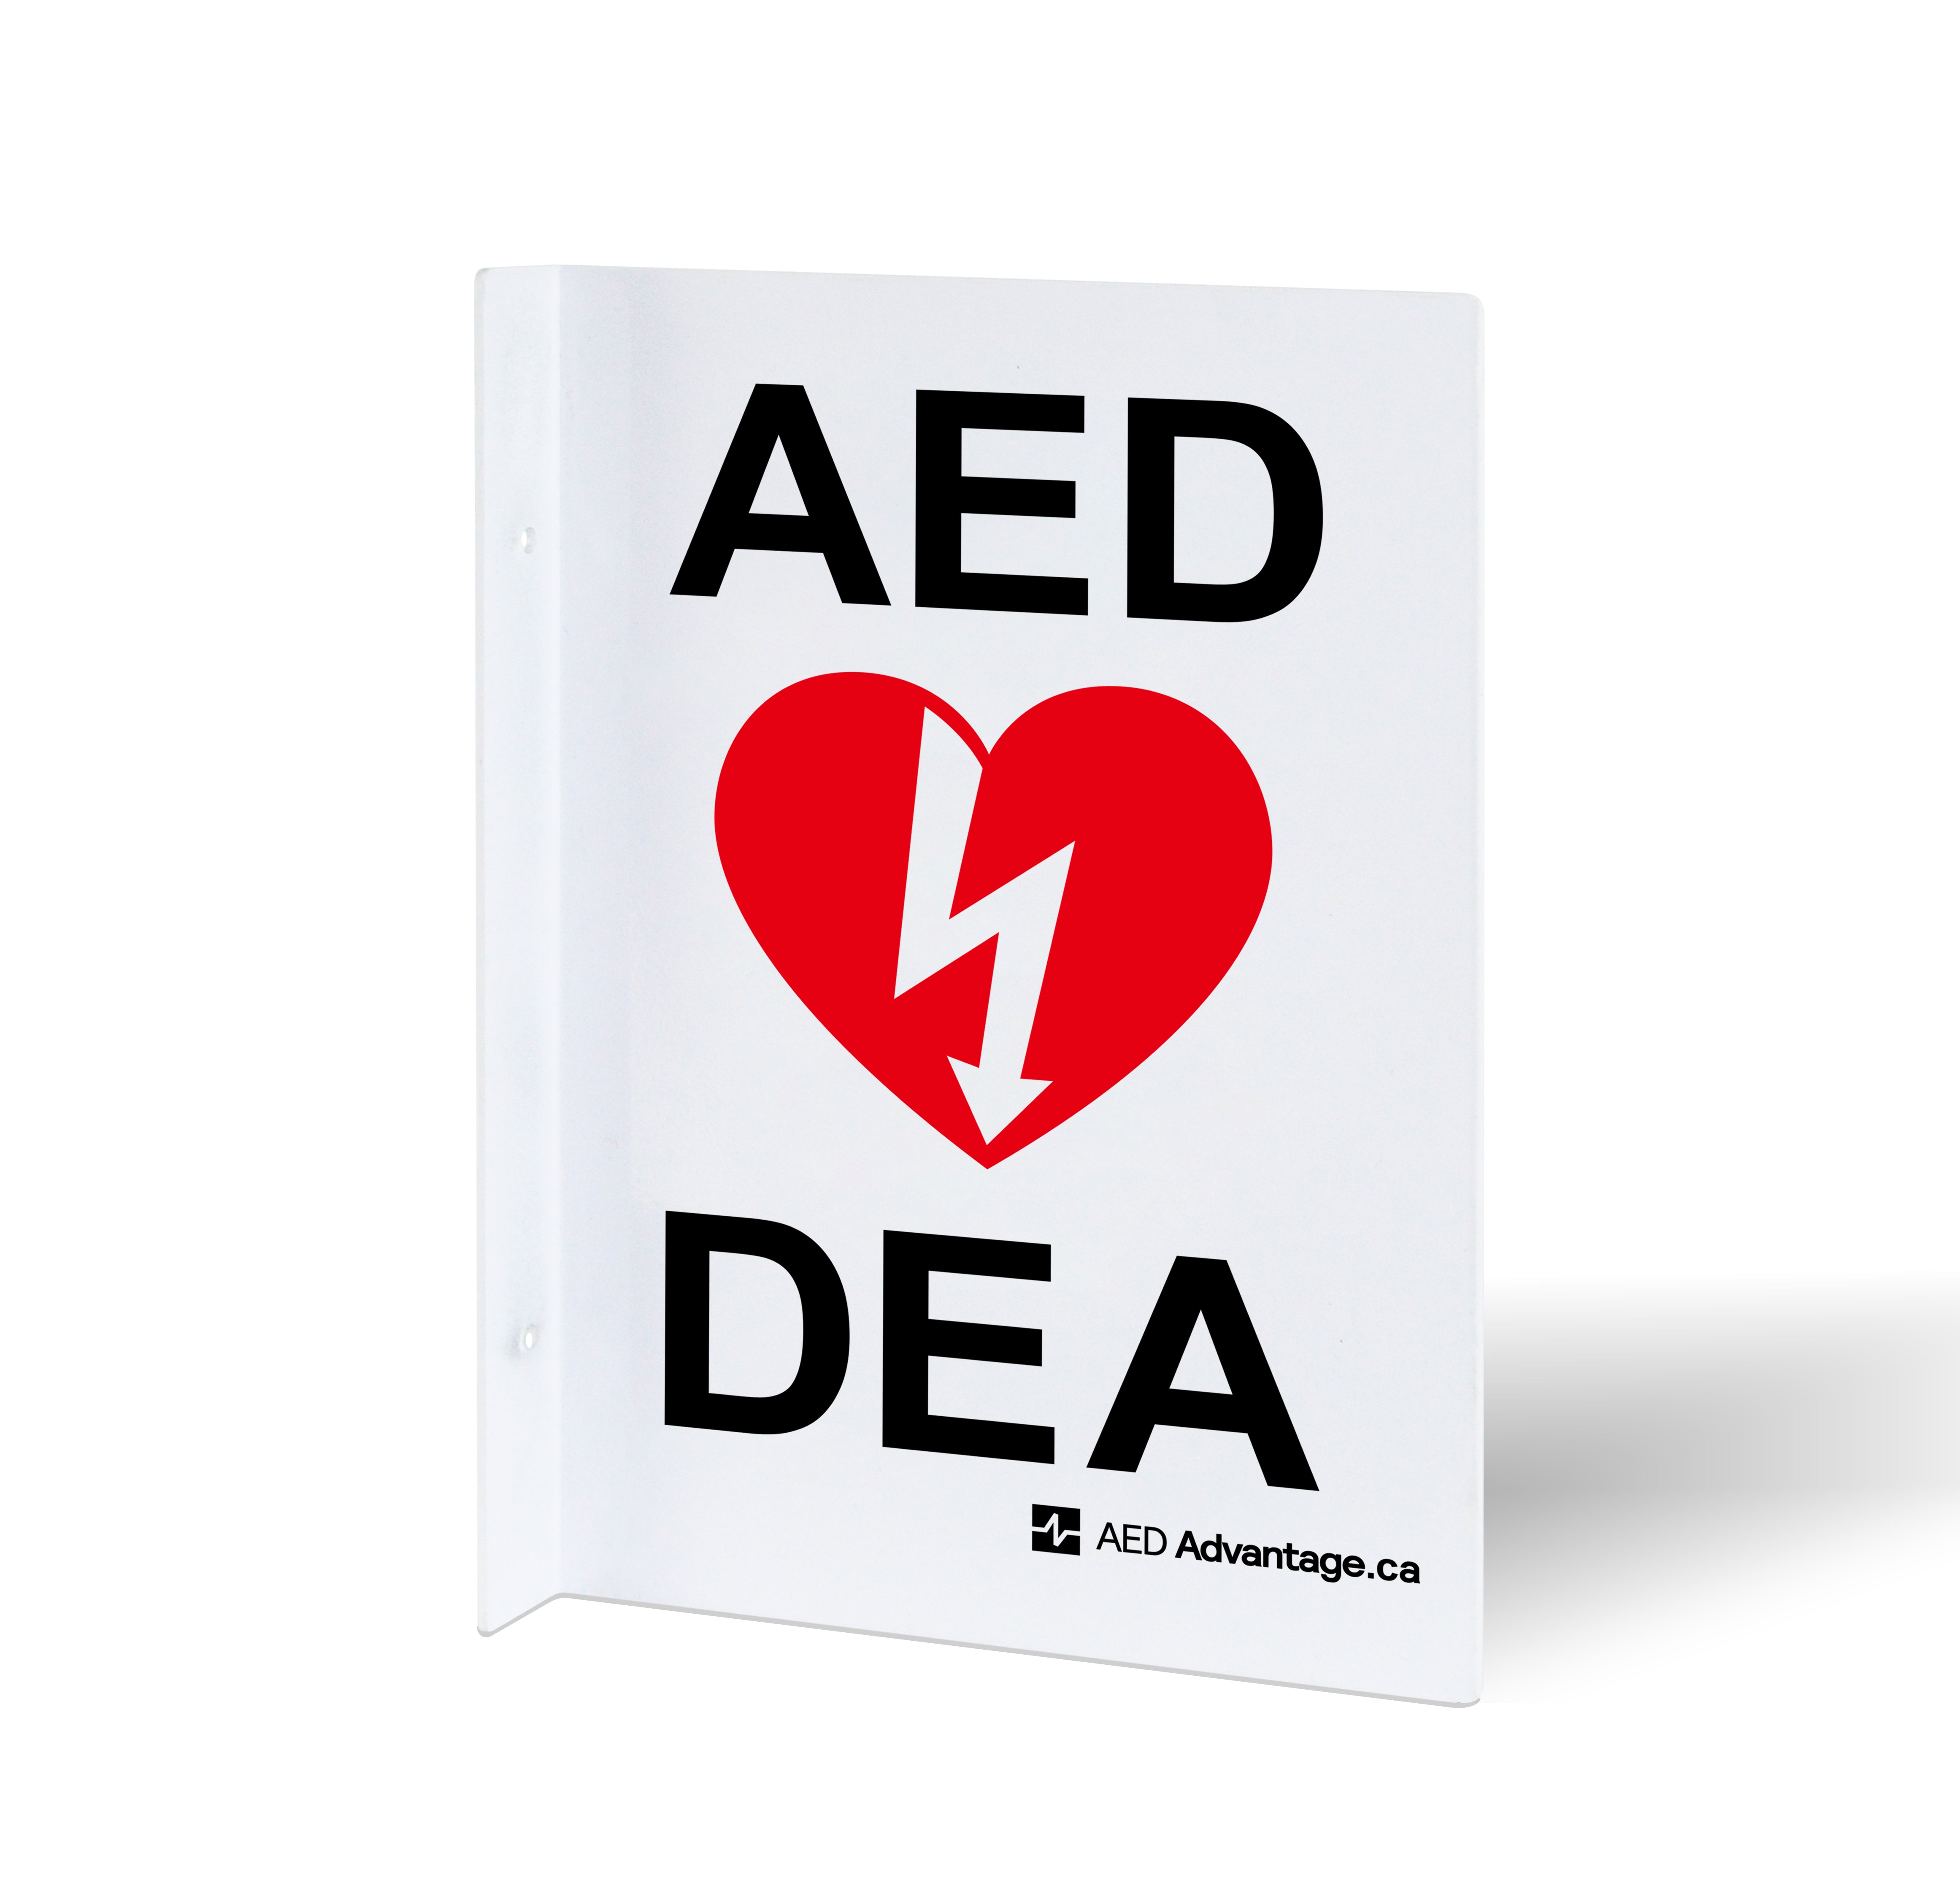 A bilingual white metal rectangular wall sign containing large bold text indicating an AED is present 